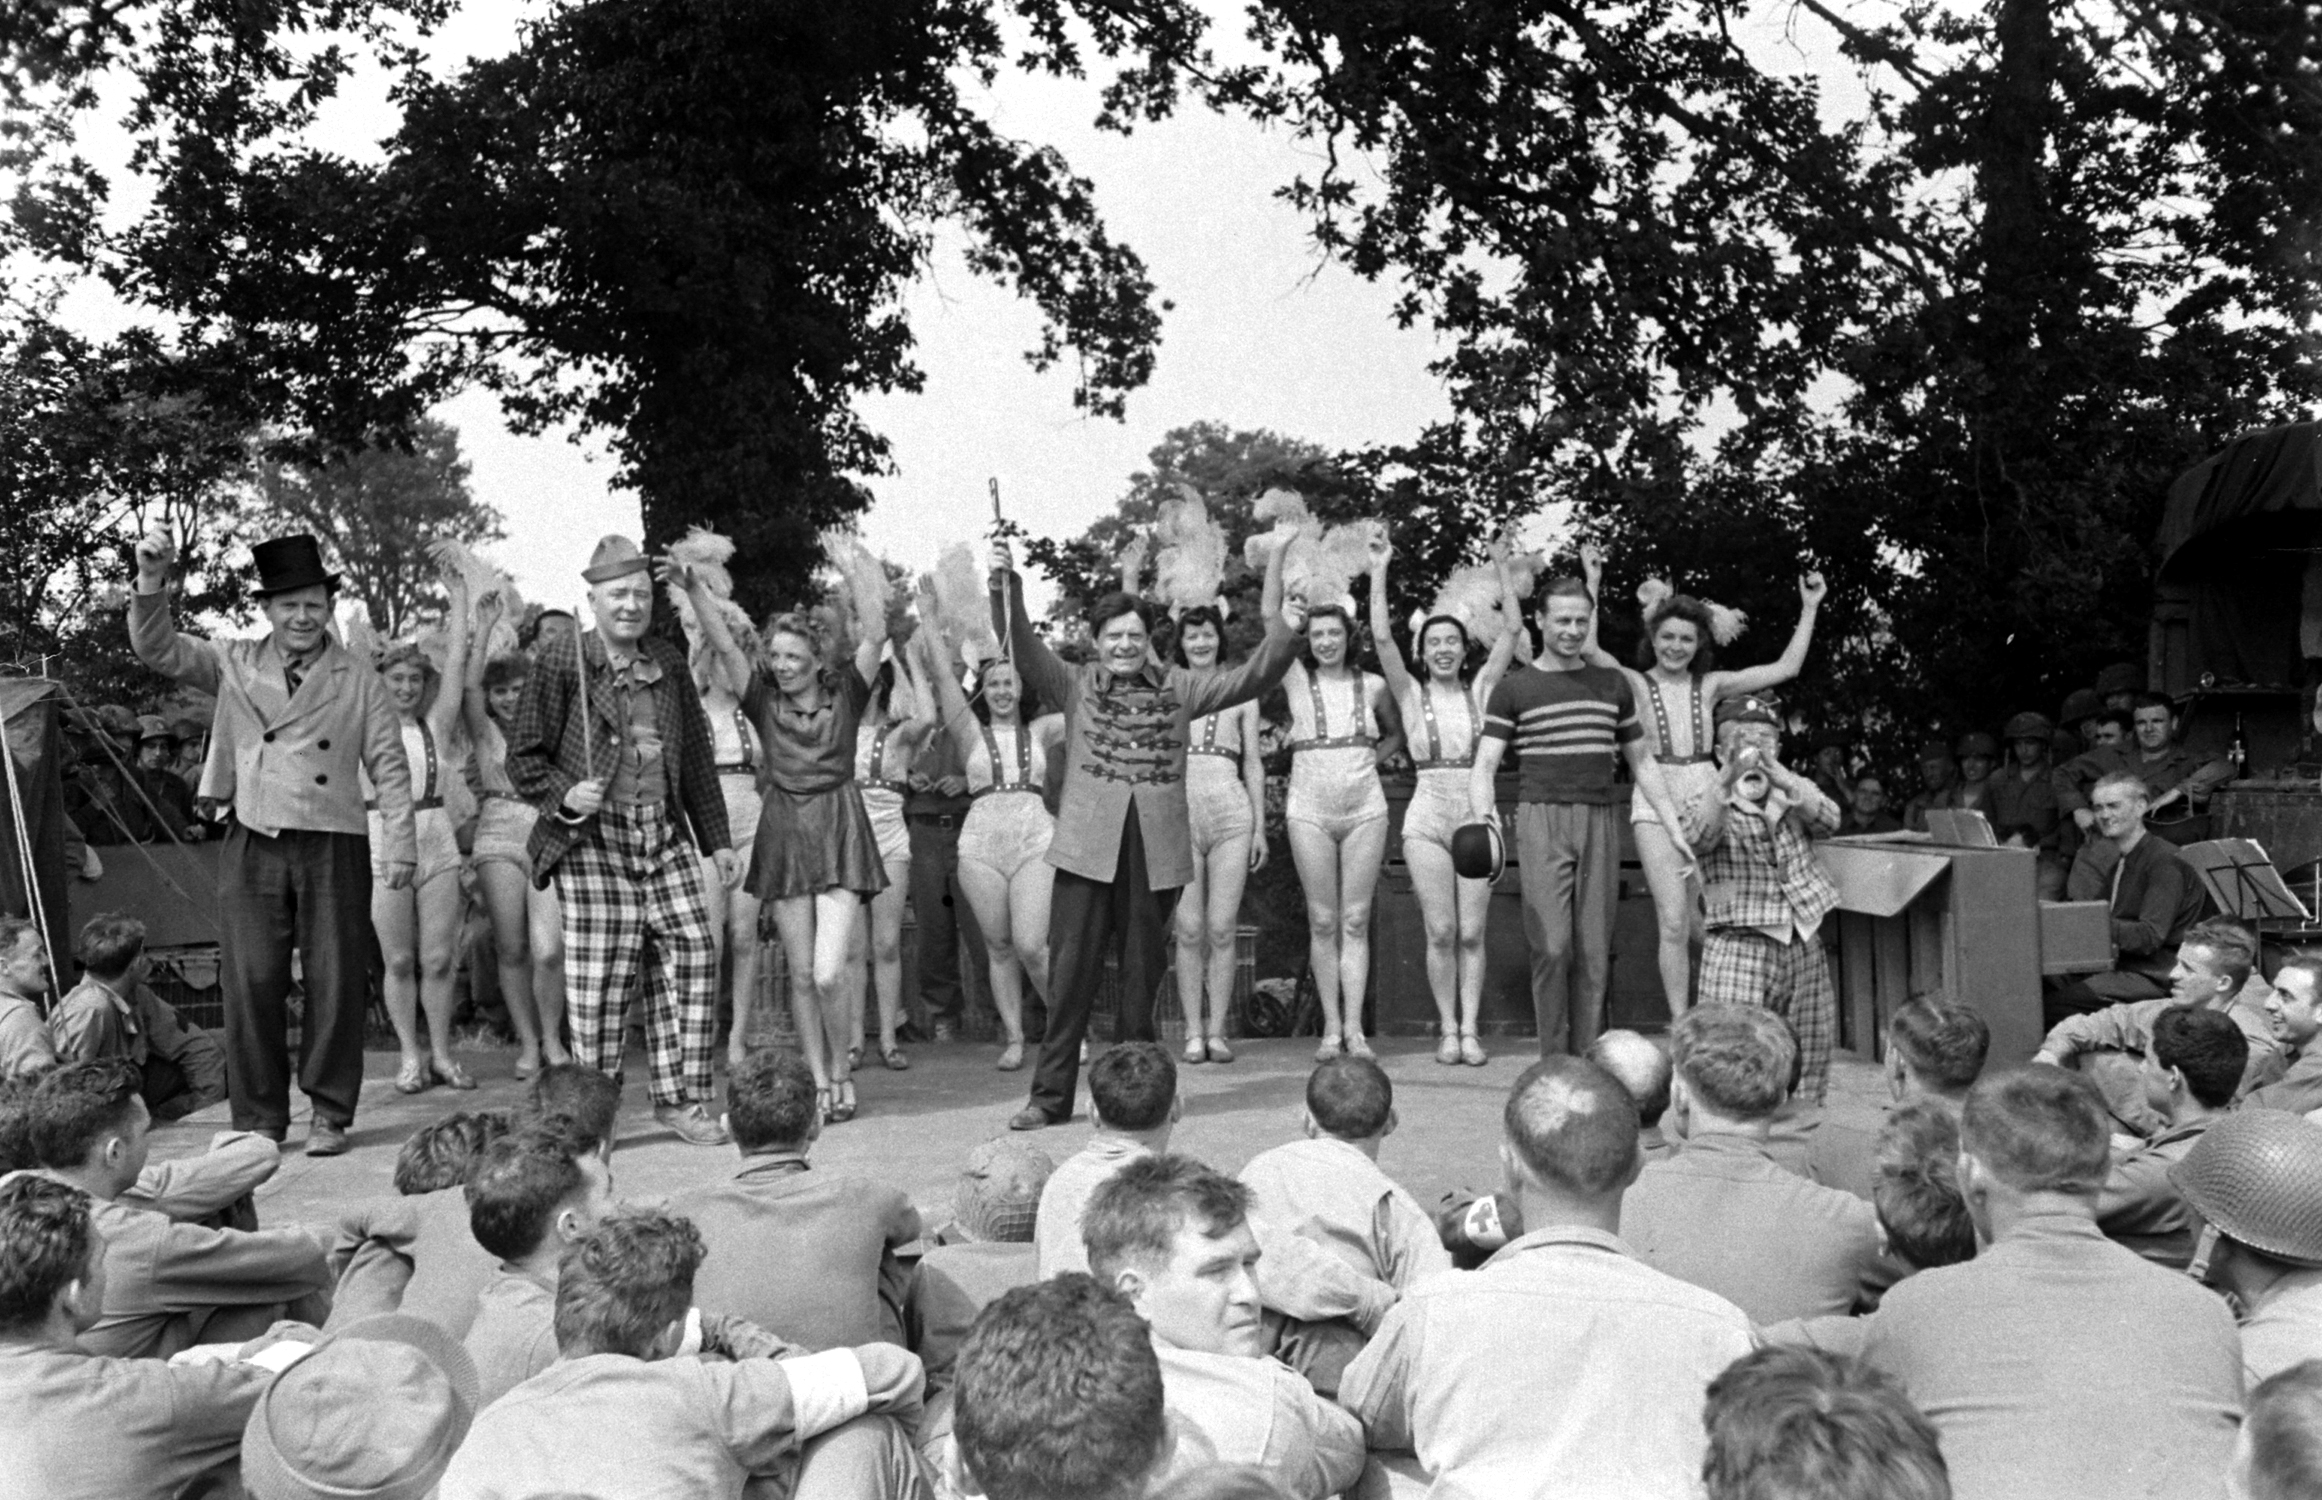 French performers in first organized show for American troops after D-Day take a bow, Normandy, July 1944.